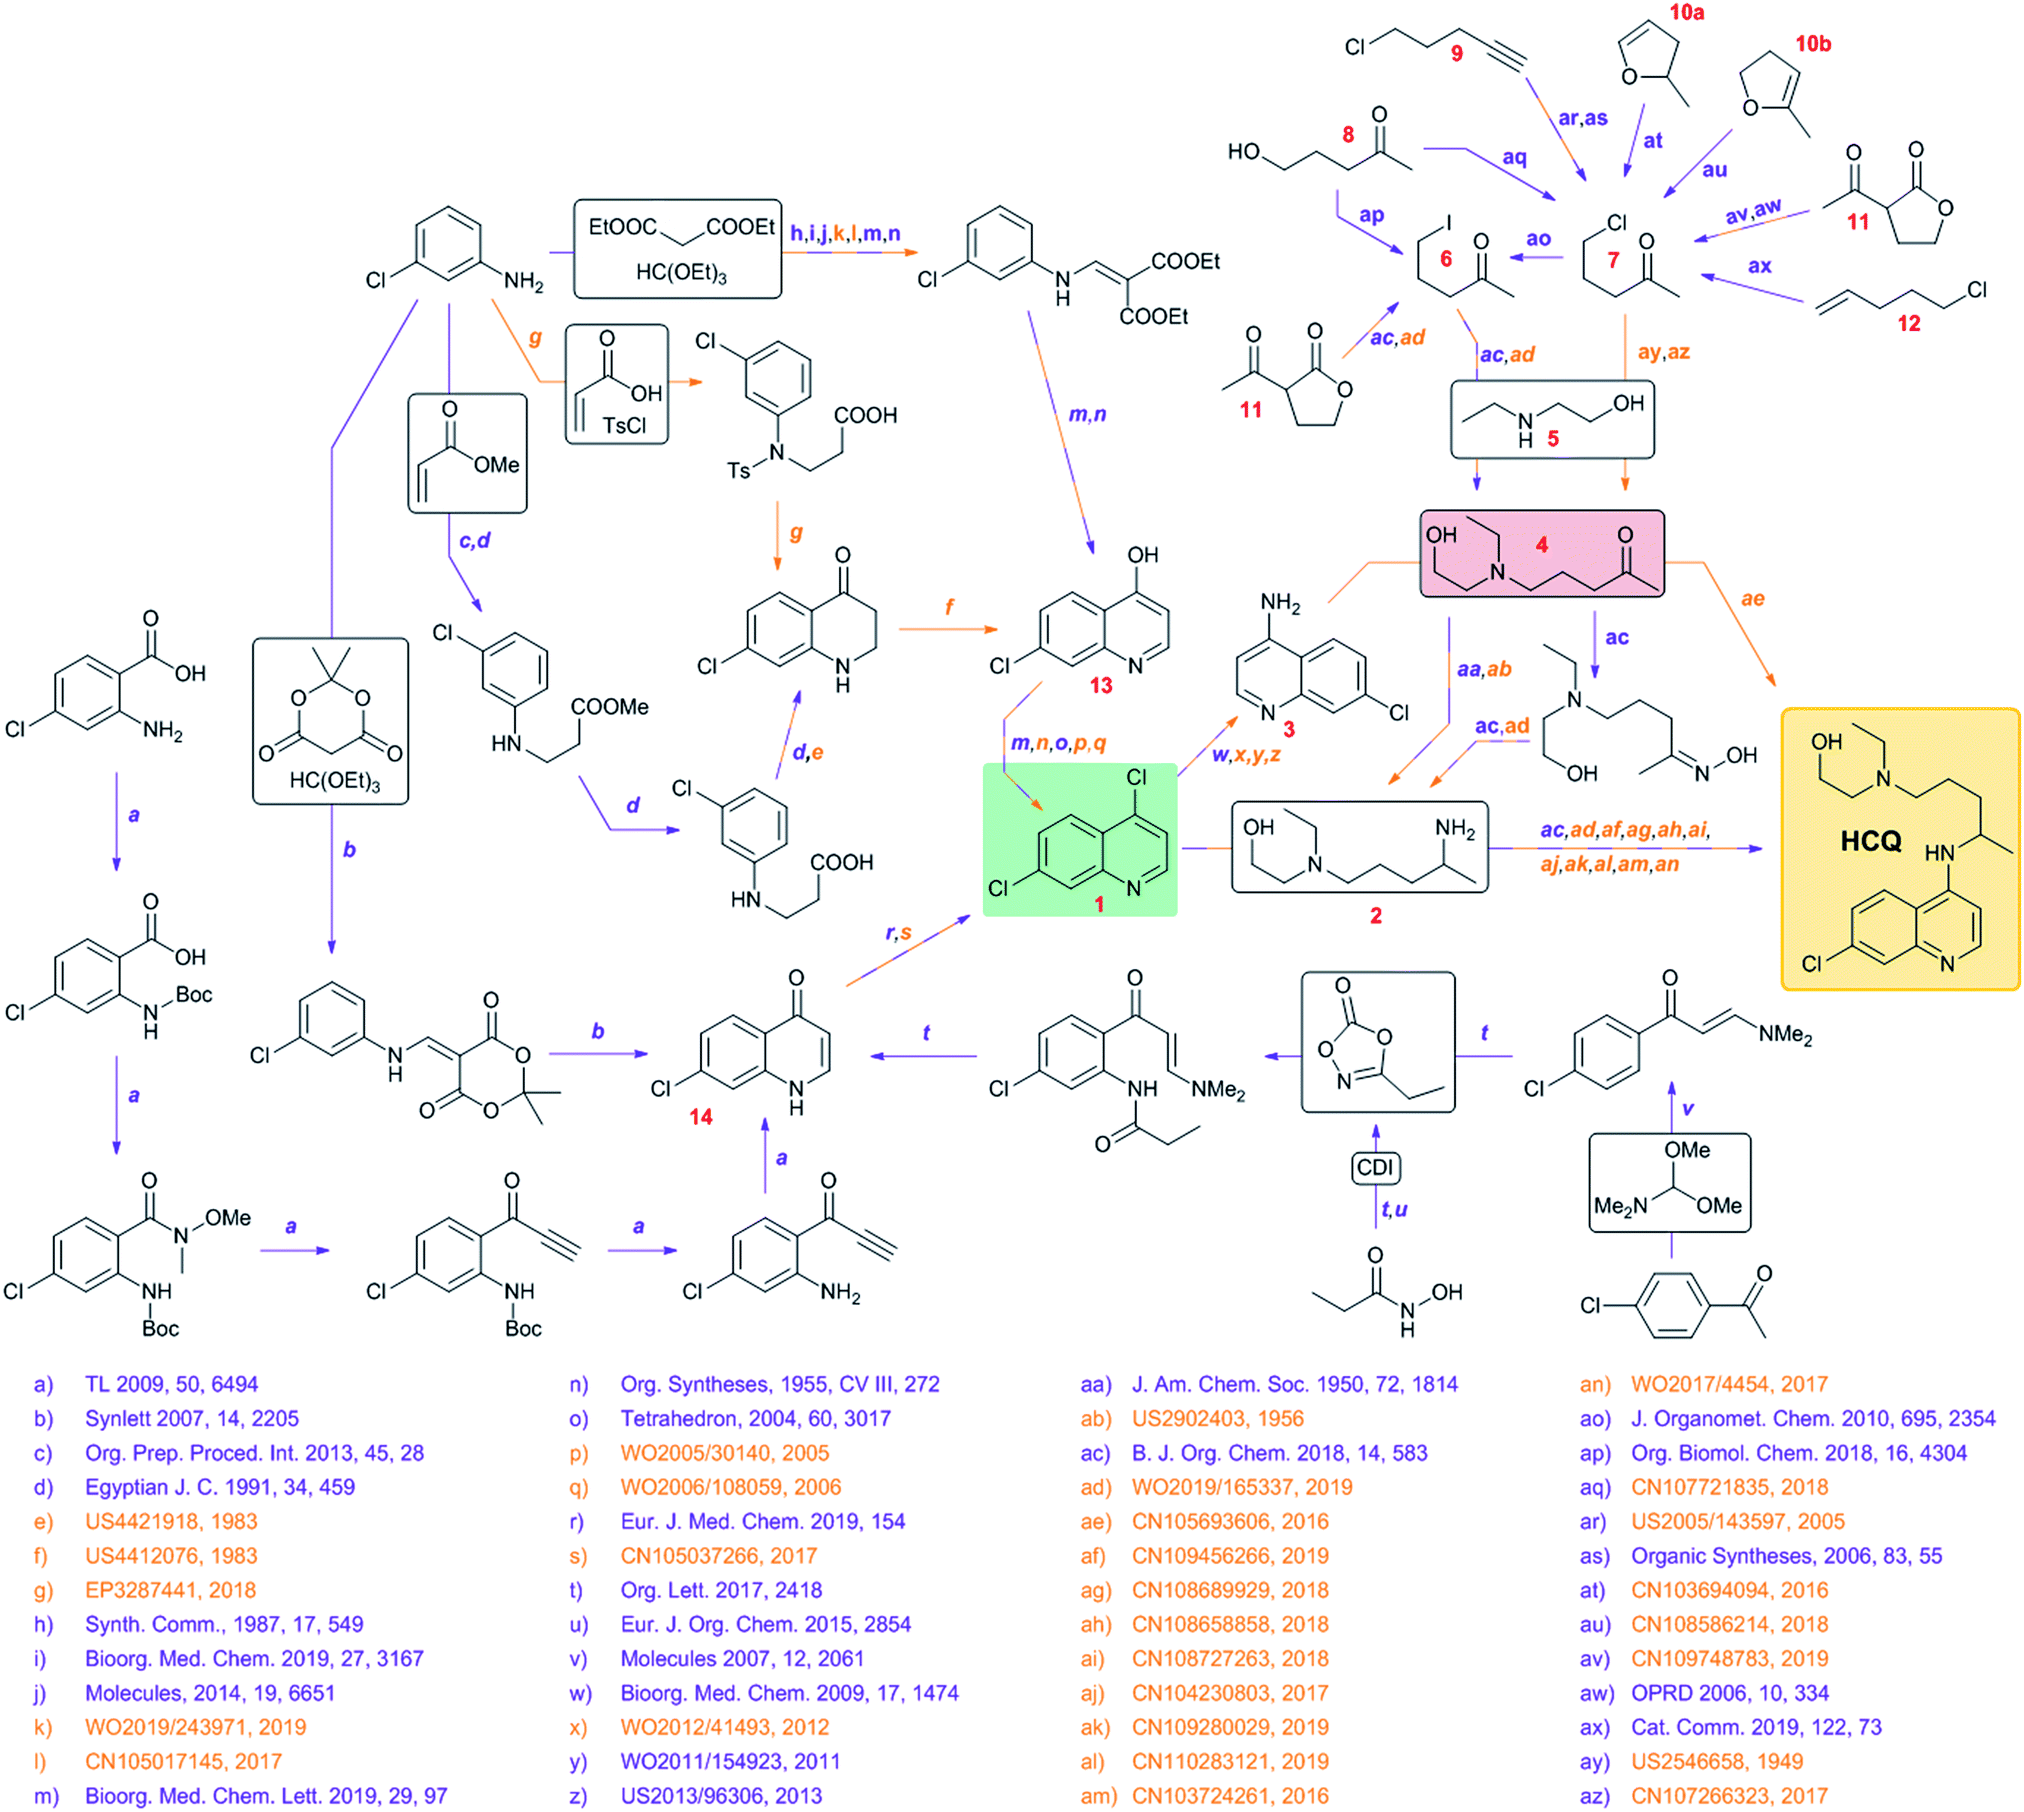 Computer Generated Synthetic Contingency Plans At Times Of Logistics And Supply Problems Scenarios For Hydroxychloroquine And Remdesivir Chemical Science Rsc Publishing